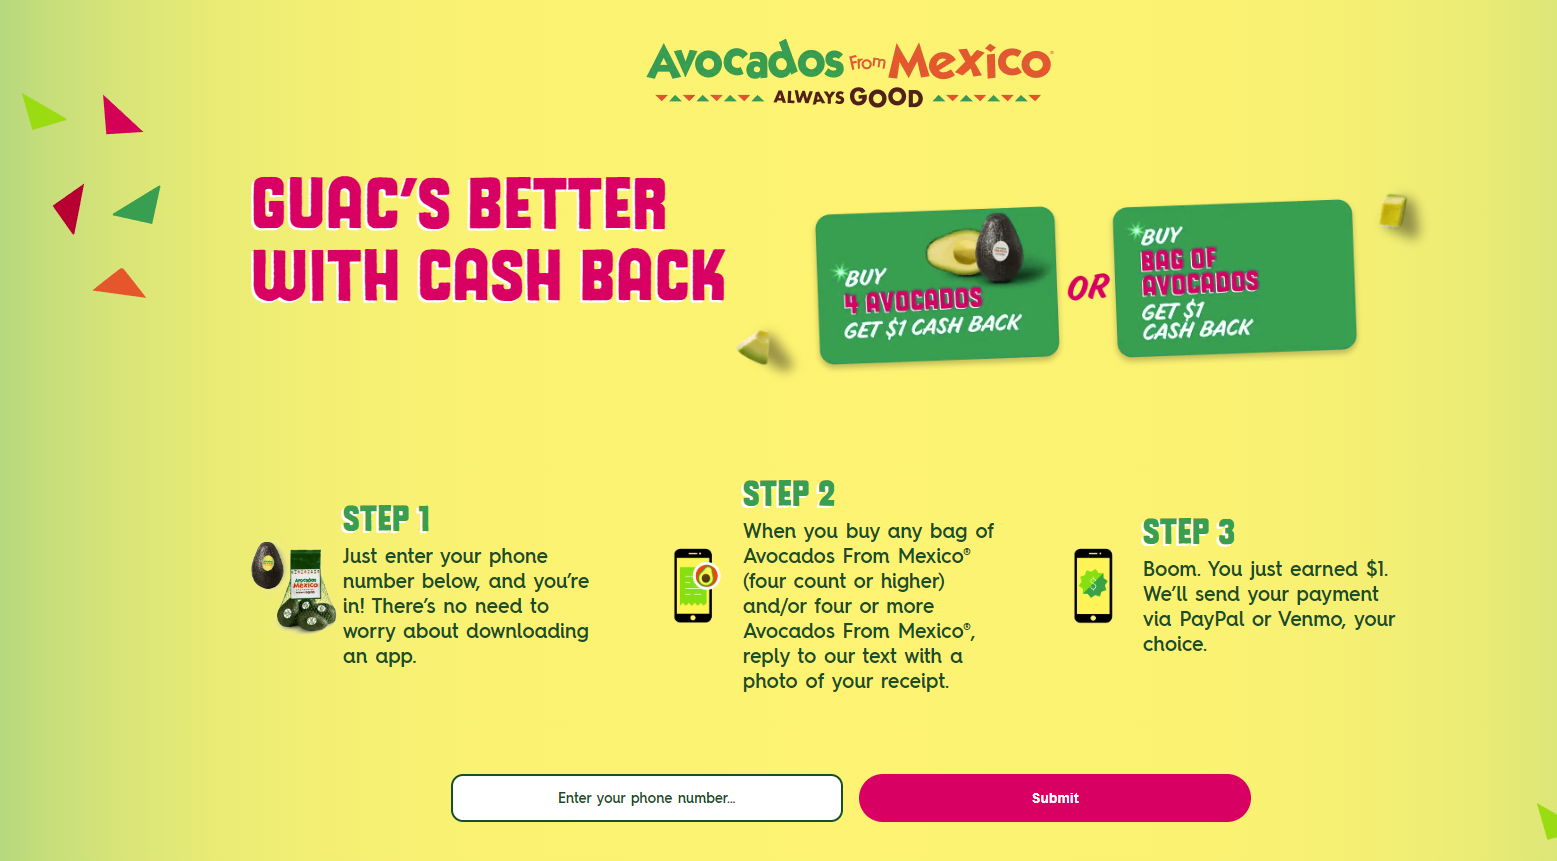 Buy one bag of "Avocados From Mexico" OR four or more "Avocados From Mexico" Get $1 back to PayPal or Venmo